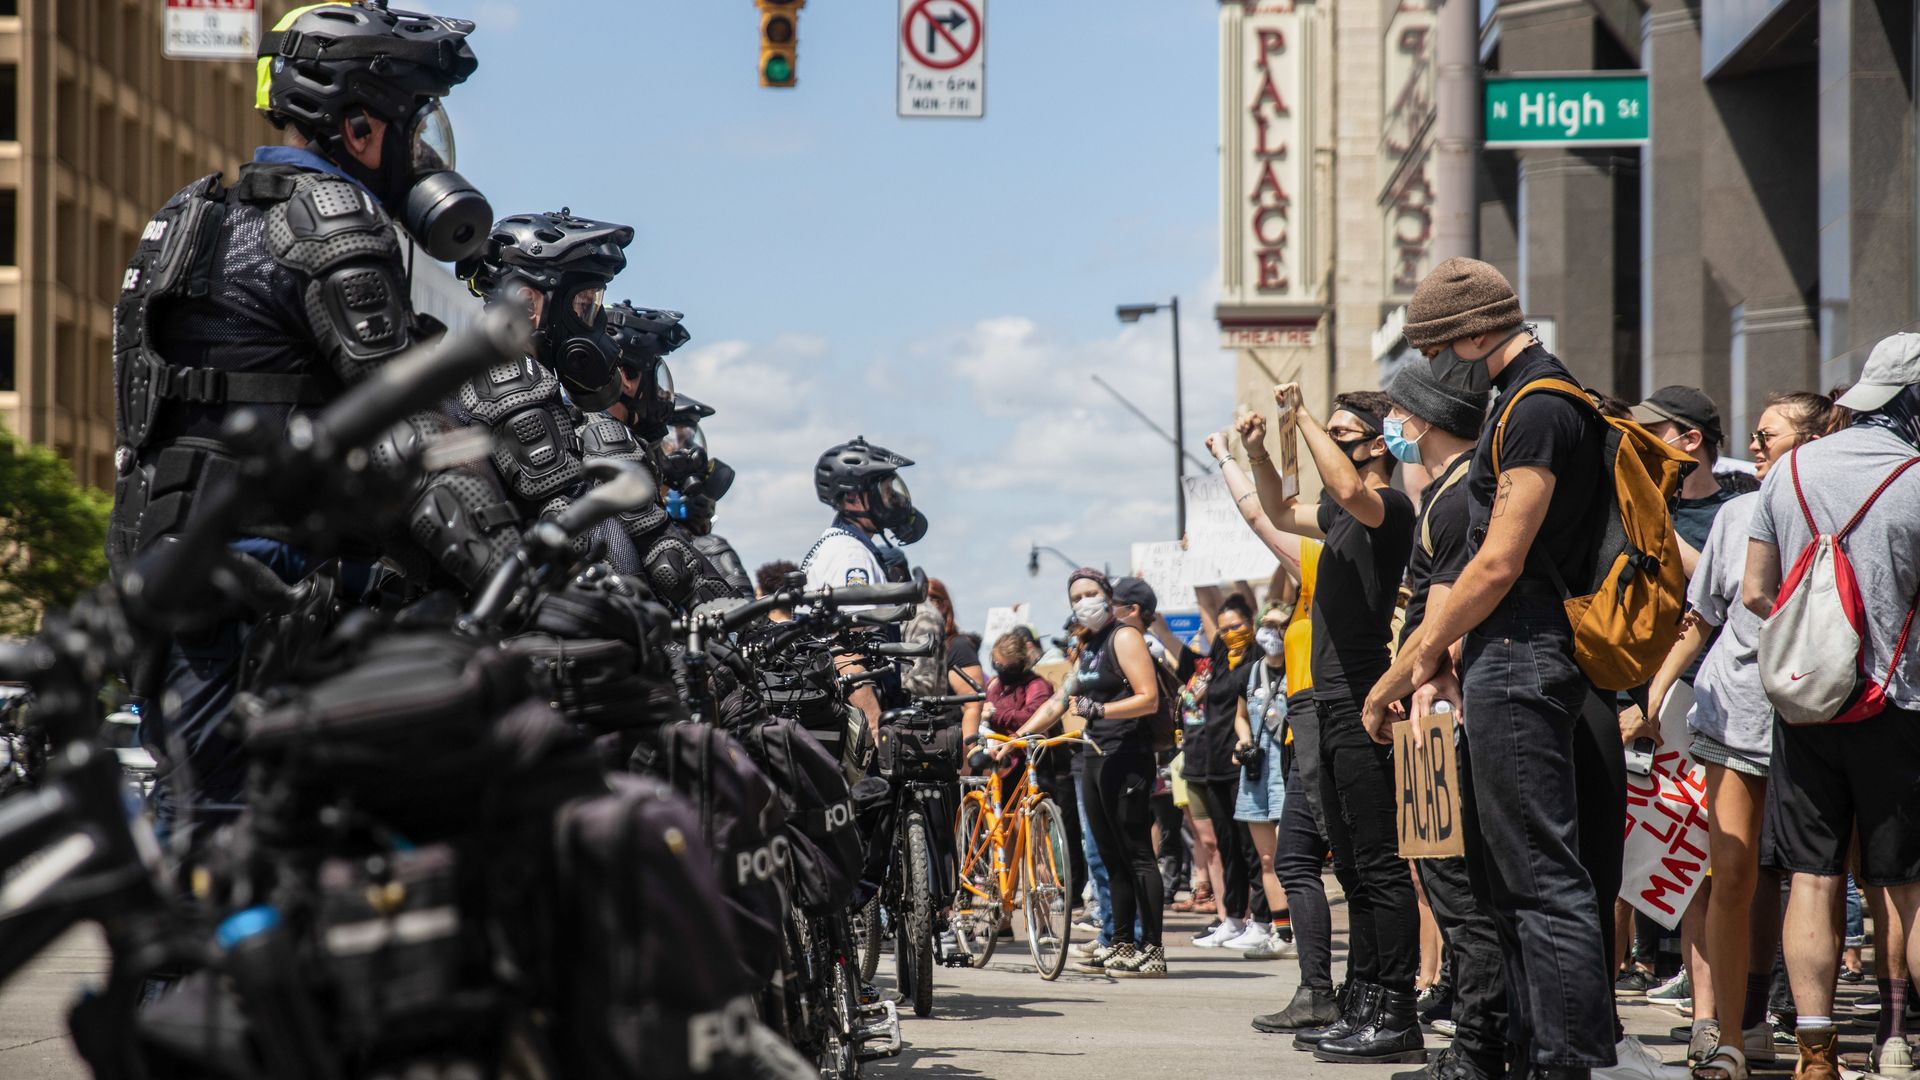 Police in riot gear patrol a Columbus protest in 2020.